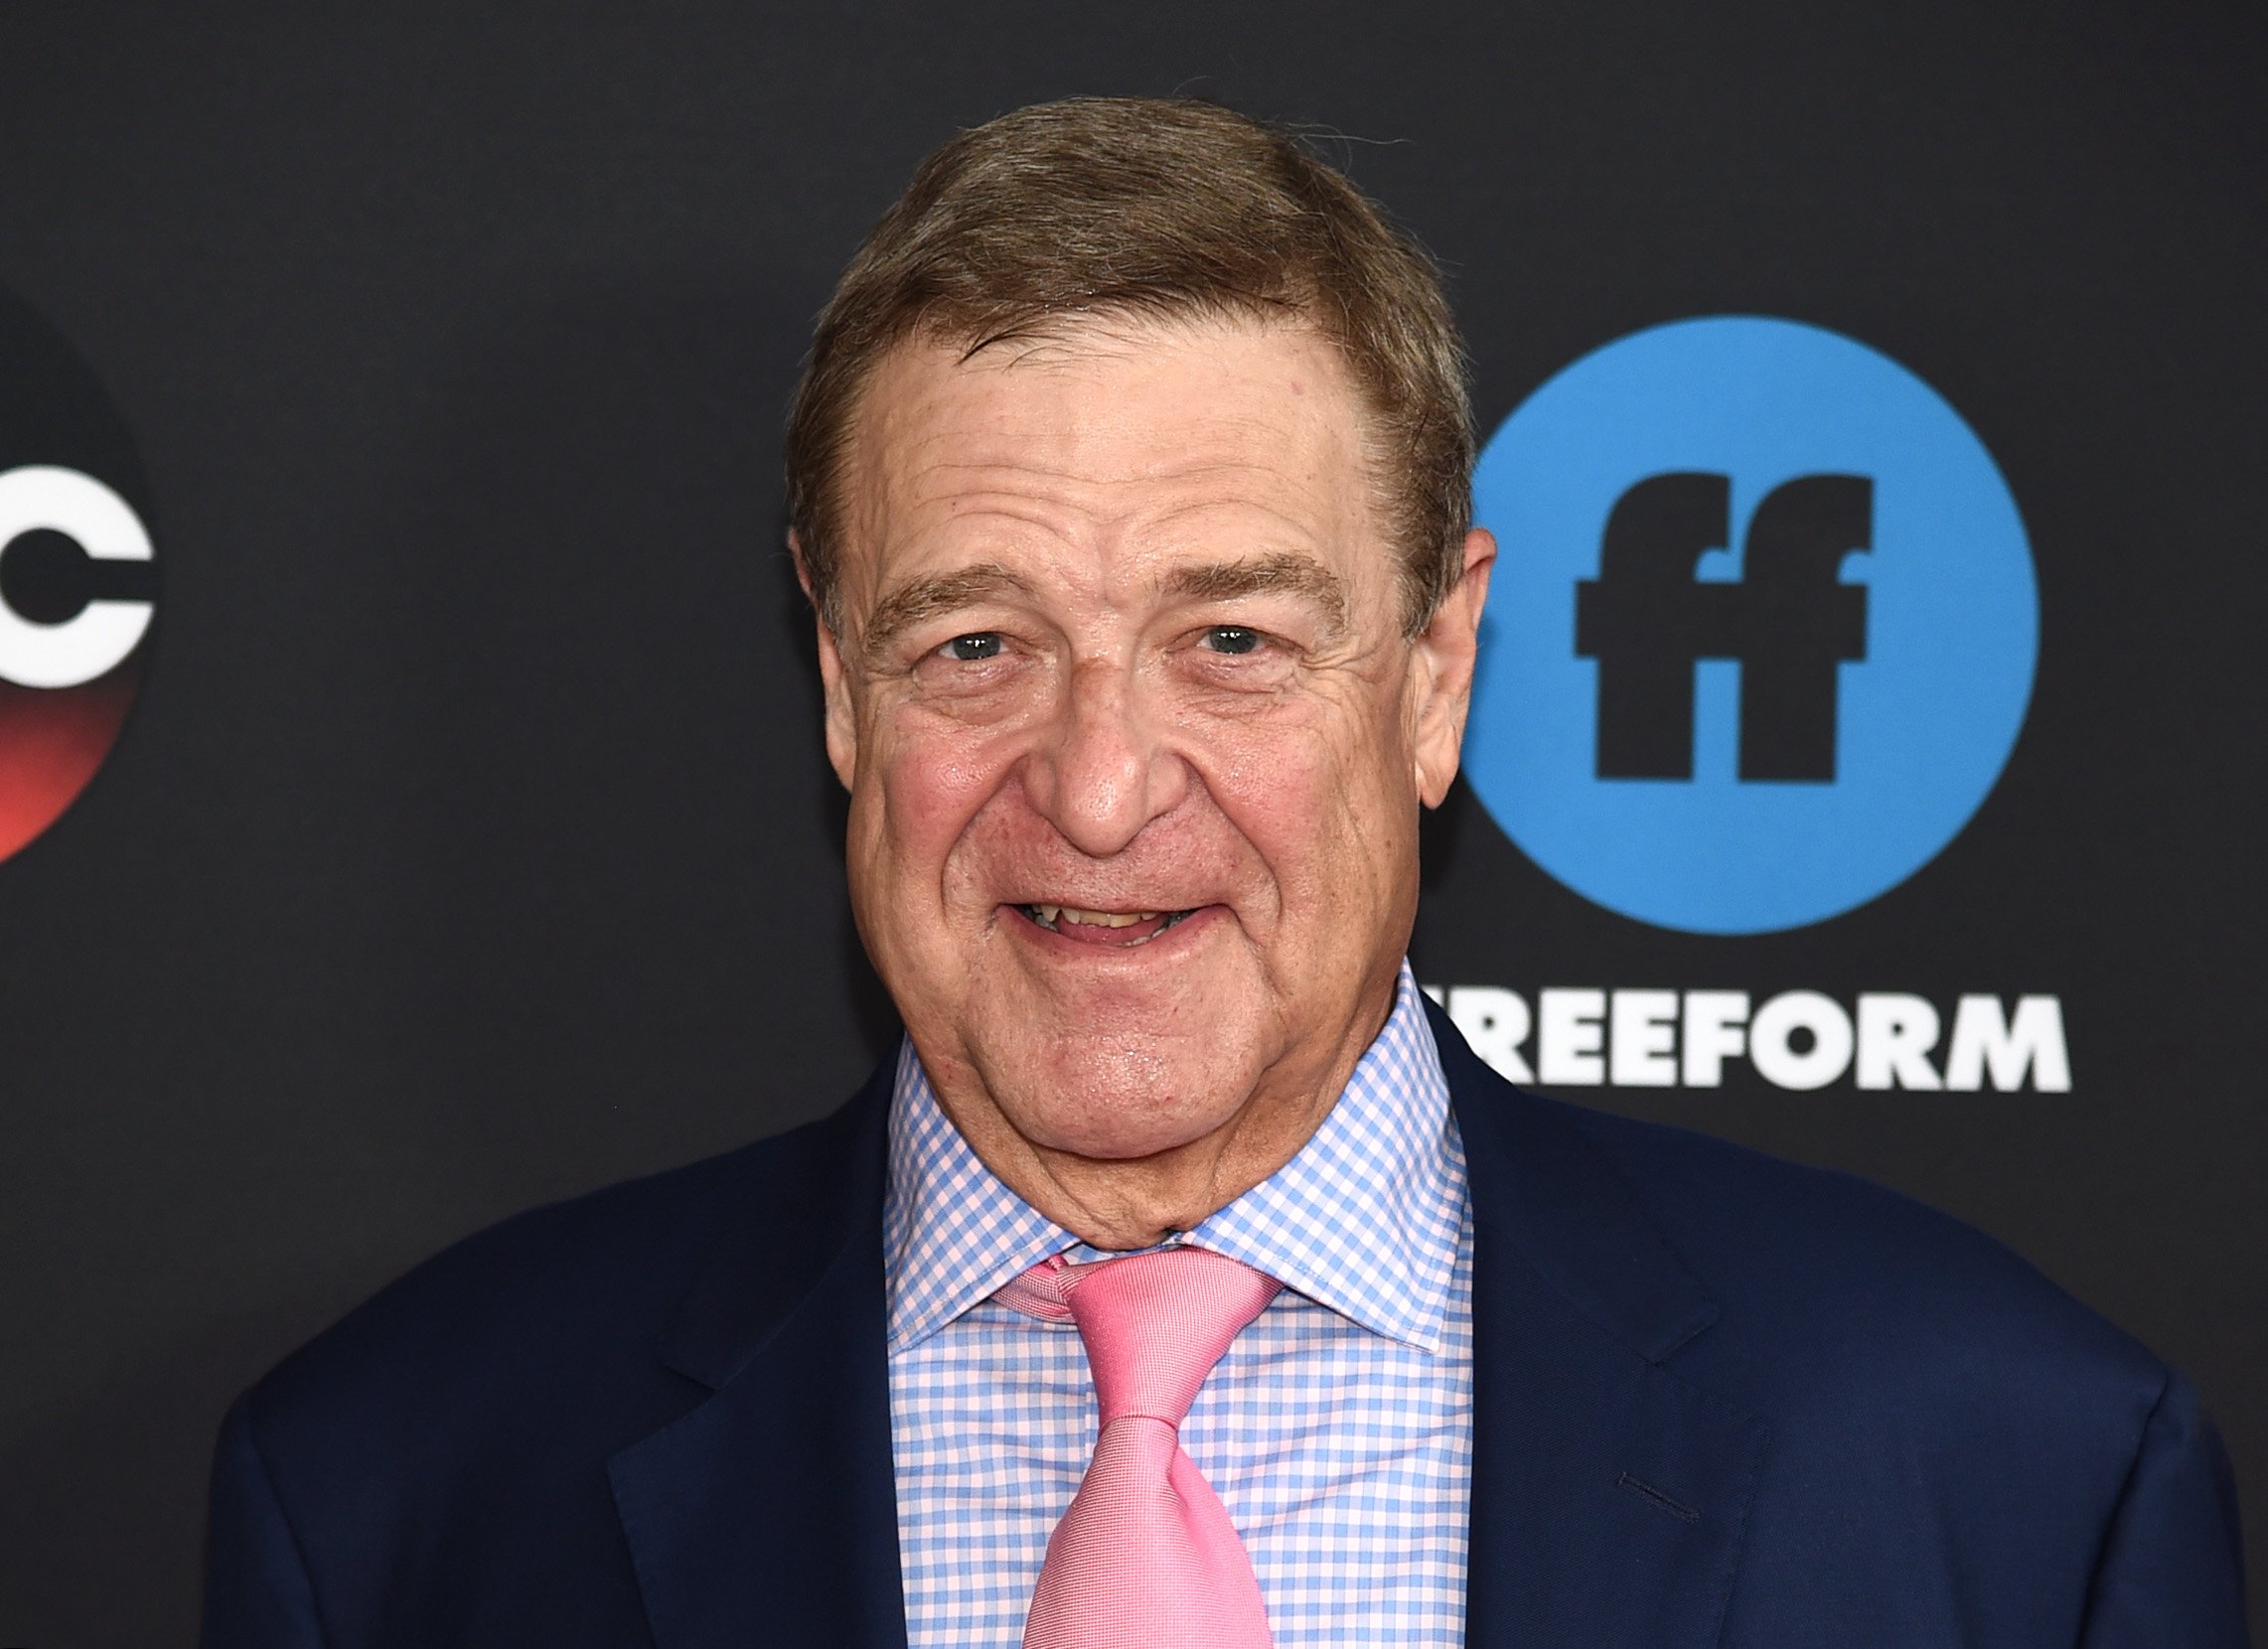 John Goodman at the Disney, ABC, Freeform Upfront on May 15, 2018 | Source: Getty Images